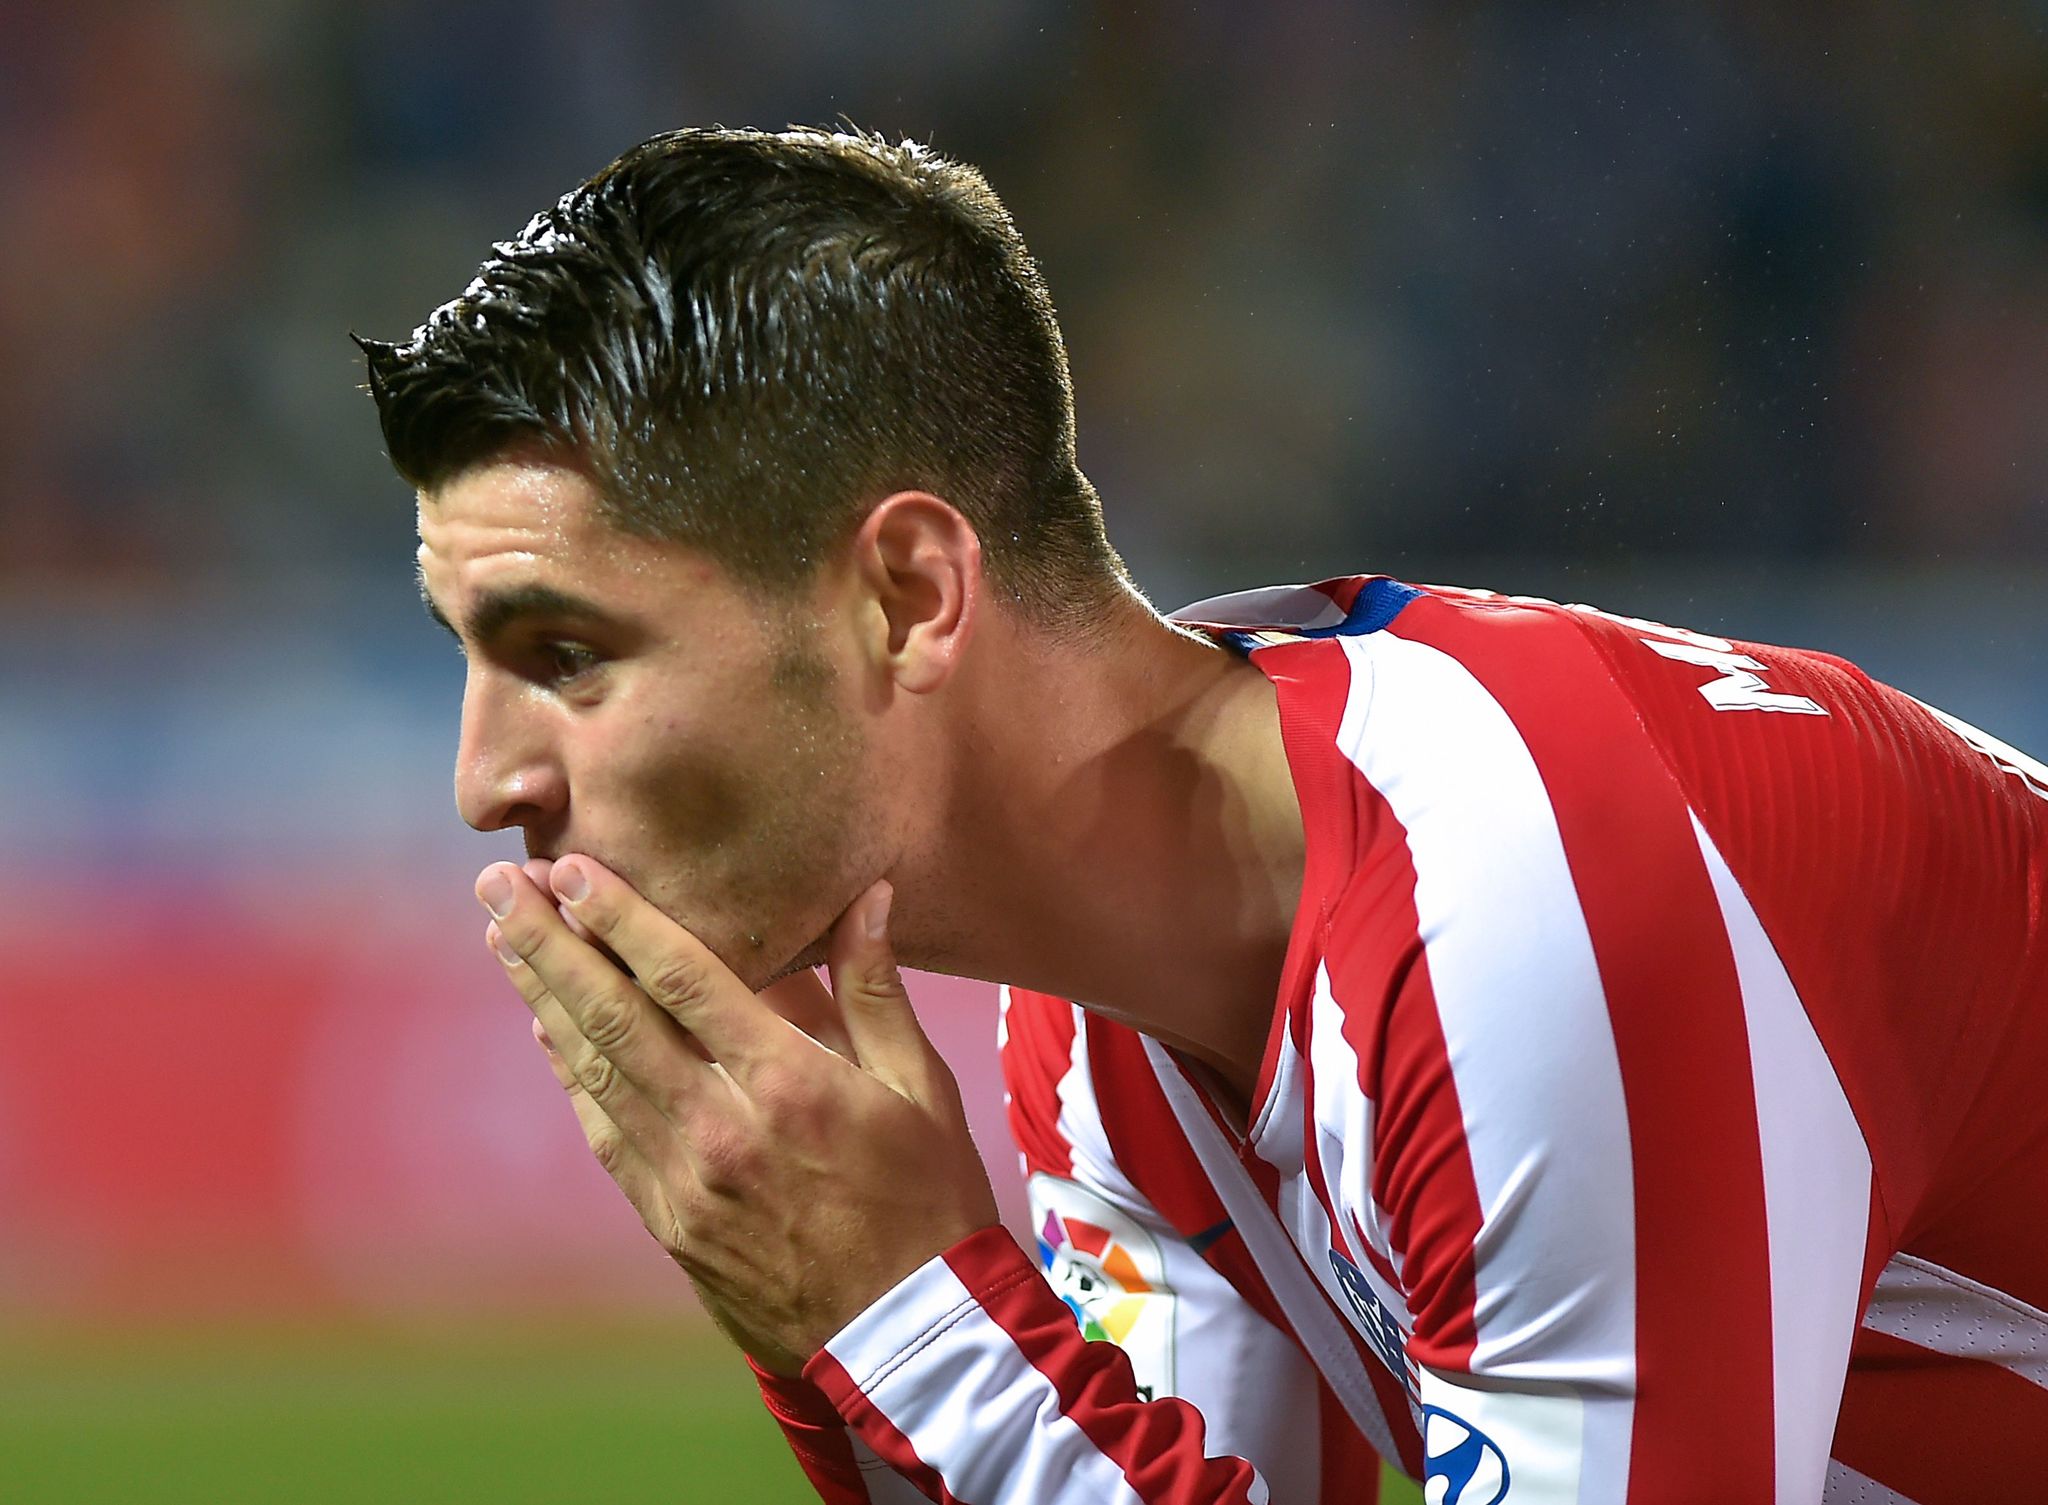 Atletico Madrids Spanish forward Alvaro <HIT>Morata</HIT> celebrates after scoring a goal during the Spanish league football match between Deportivo Alaves and Club Atletico de Madrid at the Mendizorroza stadium in Vitoria on October 29, 2019. (Photo by ANDER GILLENEA / AFP)